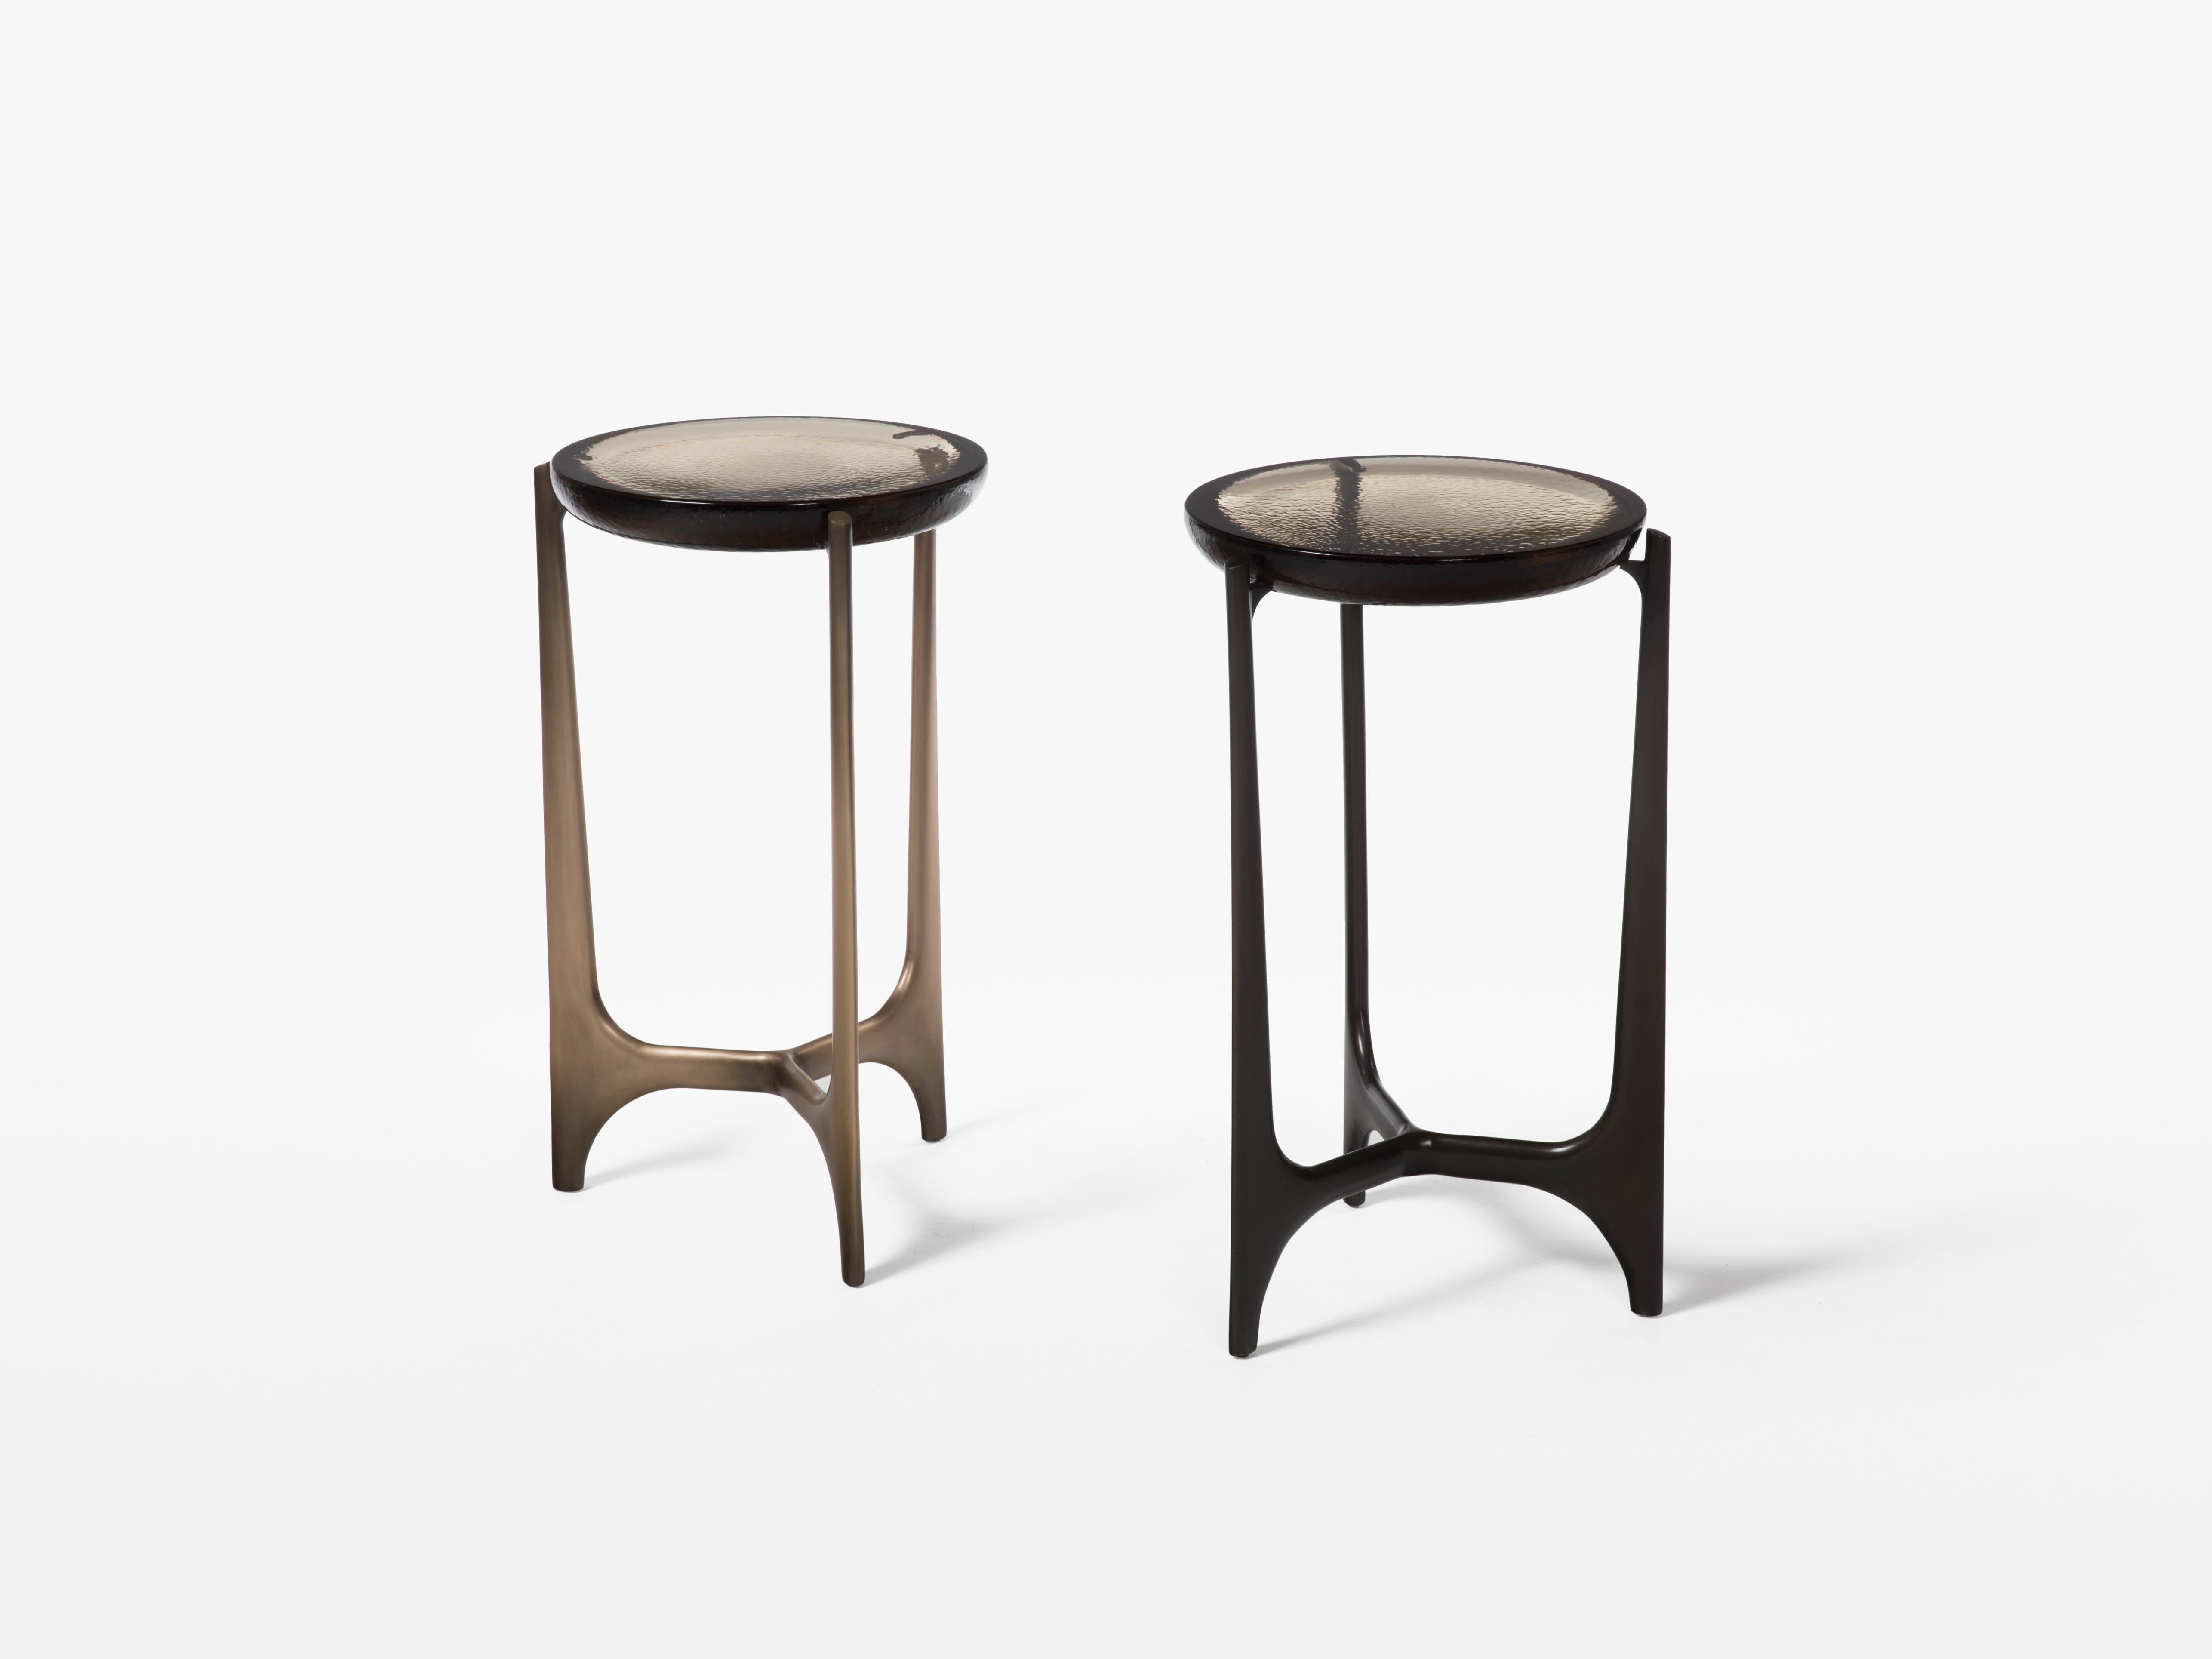 HOLLY HUNT Portia drink table with fog cast glass top and dark bronze base. Inspired by the free-flowing modernism of Oscar Niemayer, the Portia is at once elemental and otherworldly. Its bronze base, available in both light and dark monument